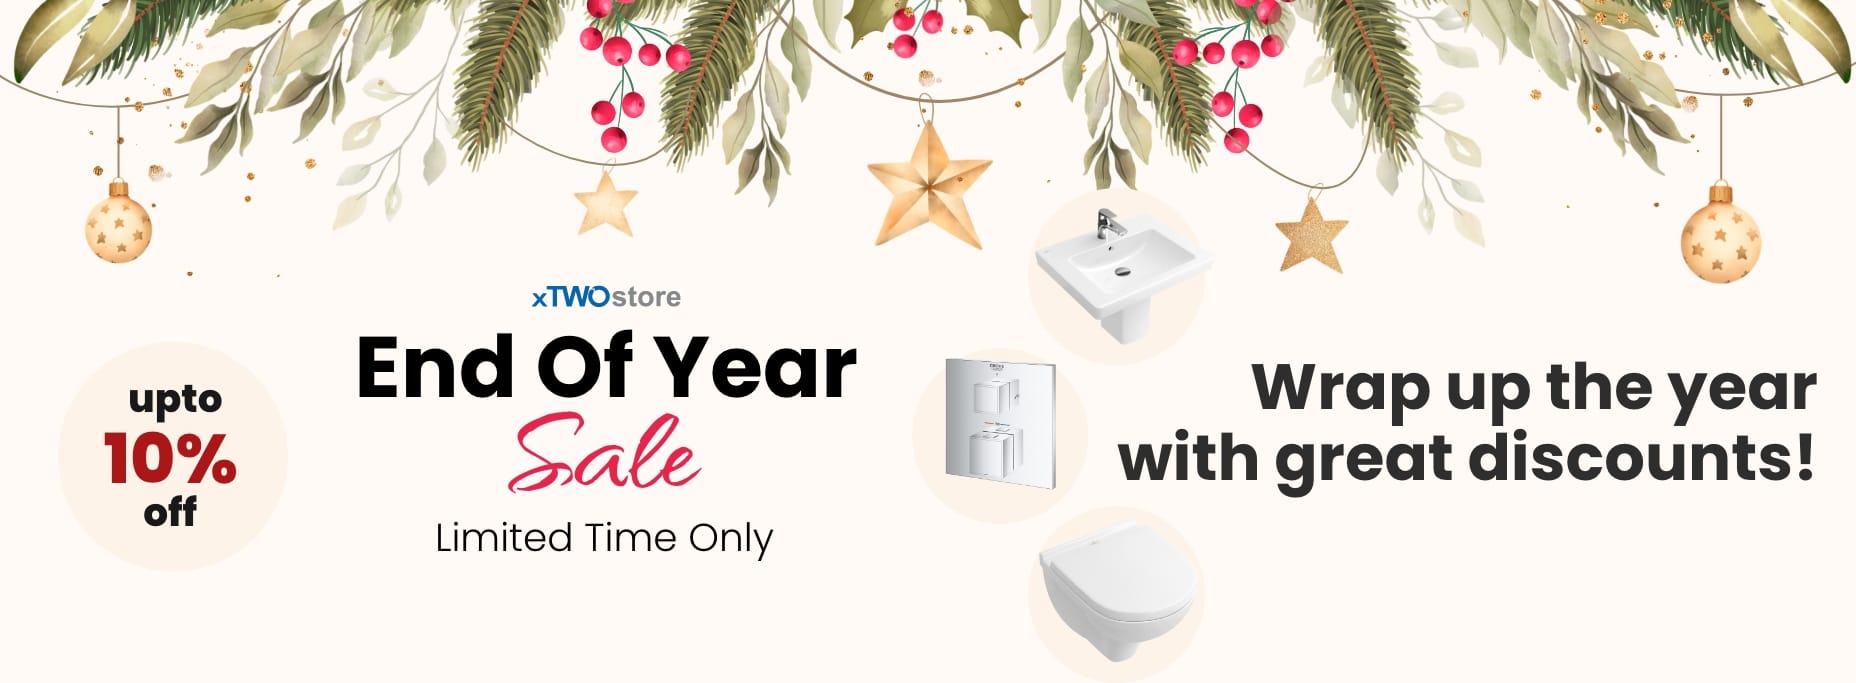 Year End Sale  at xTWOstore